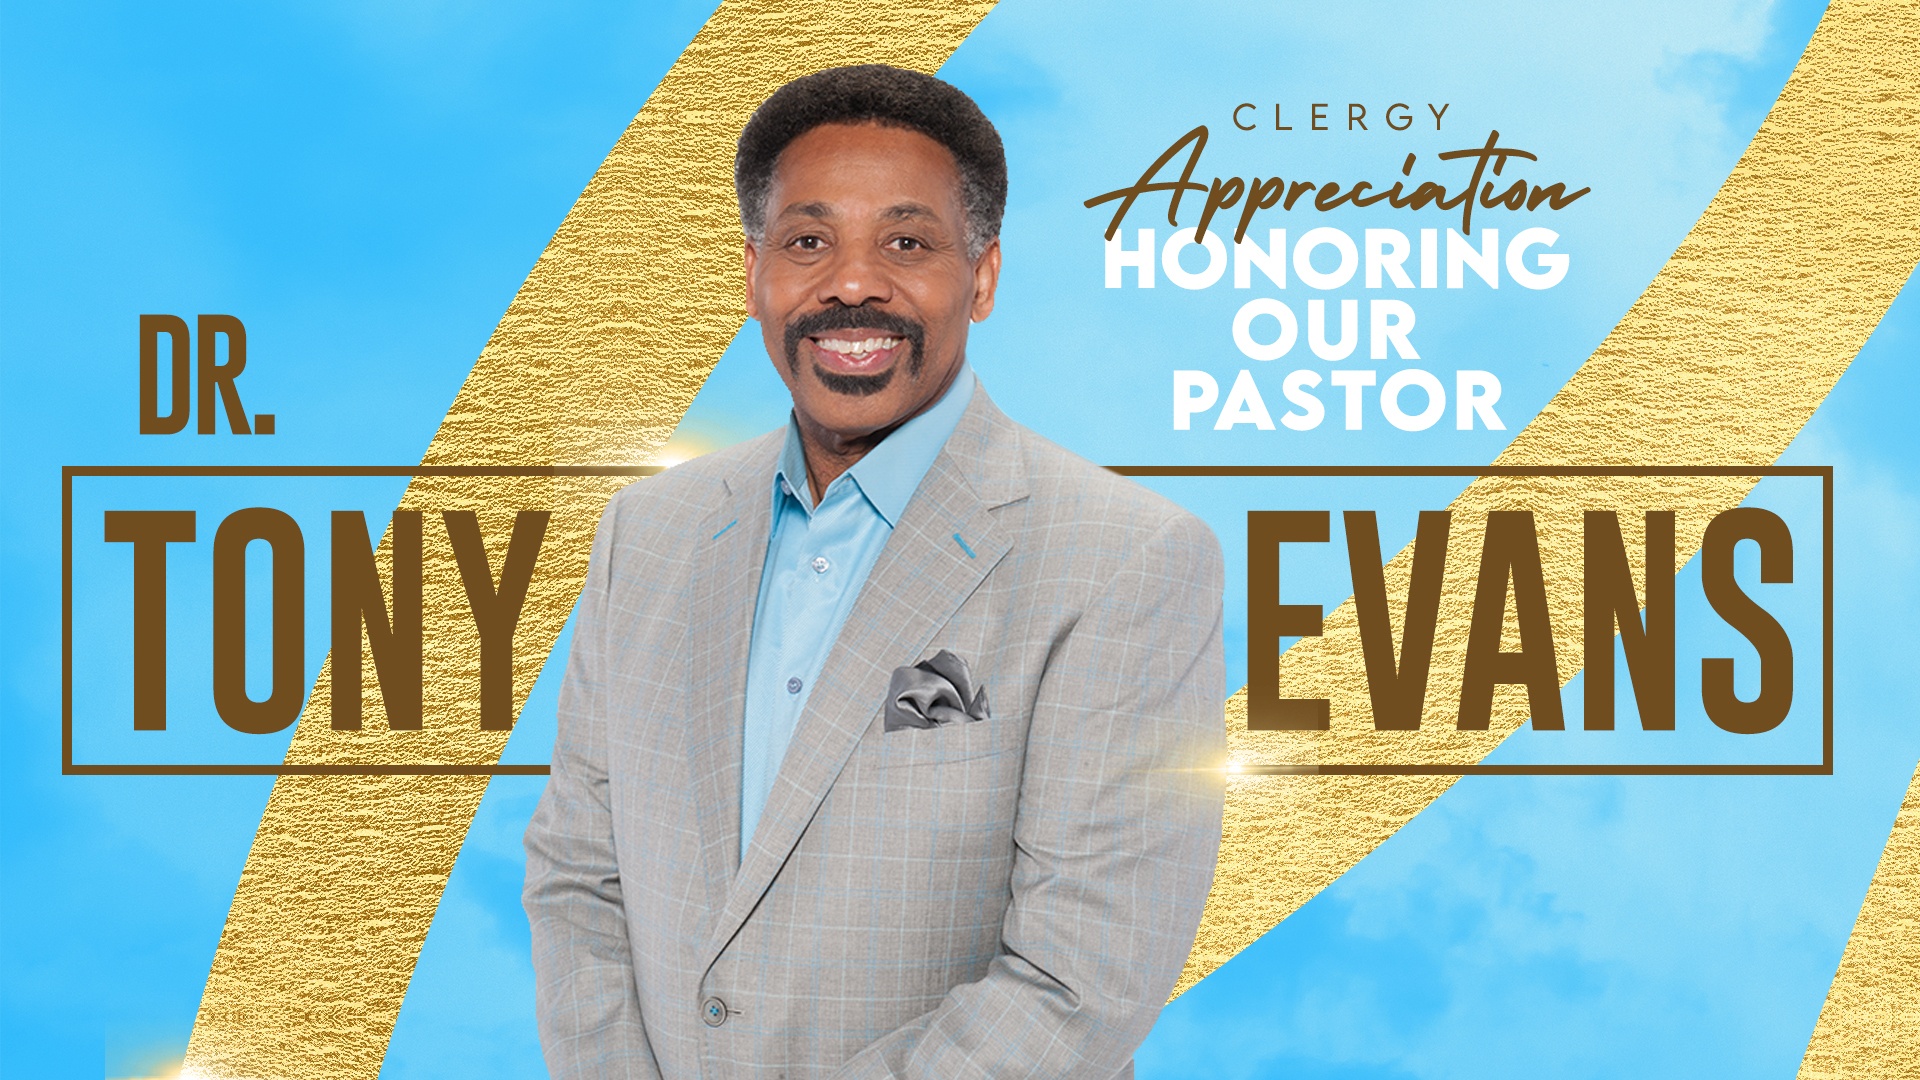 Honoring Dr. Tony Evans during Clergy Appreciation Month